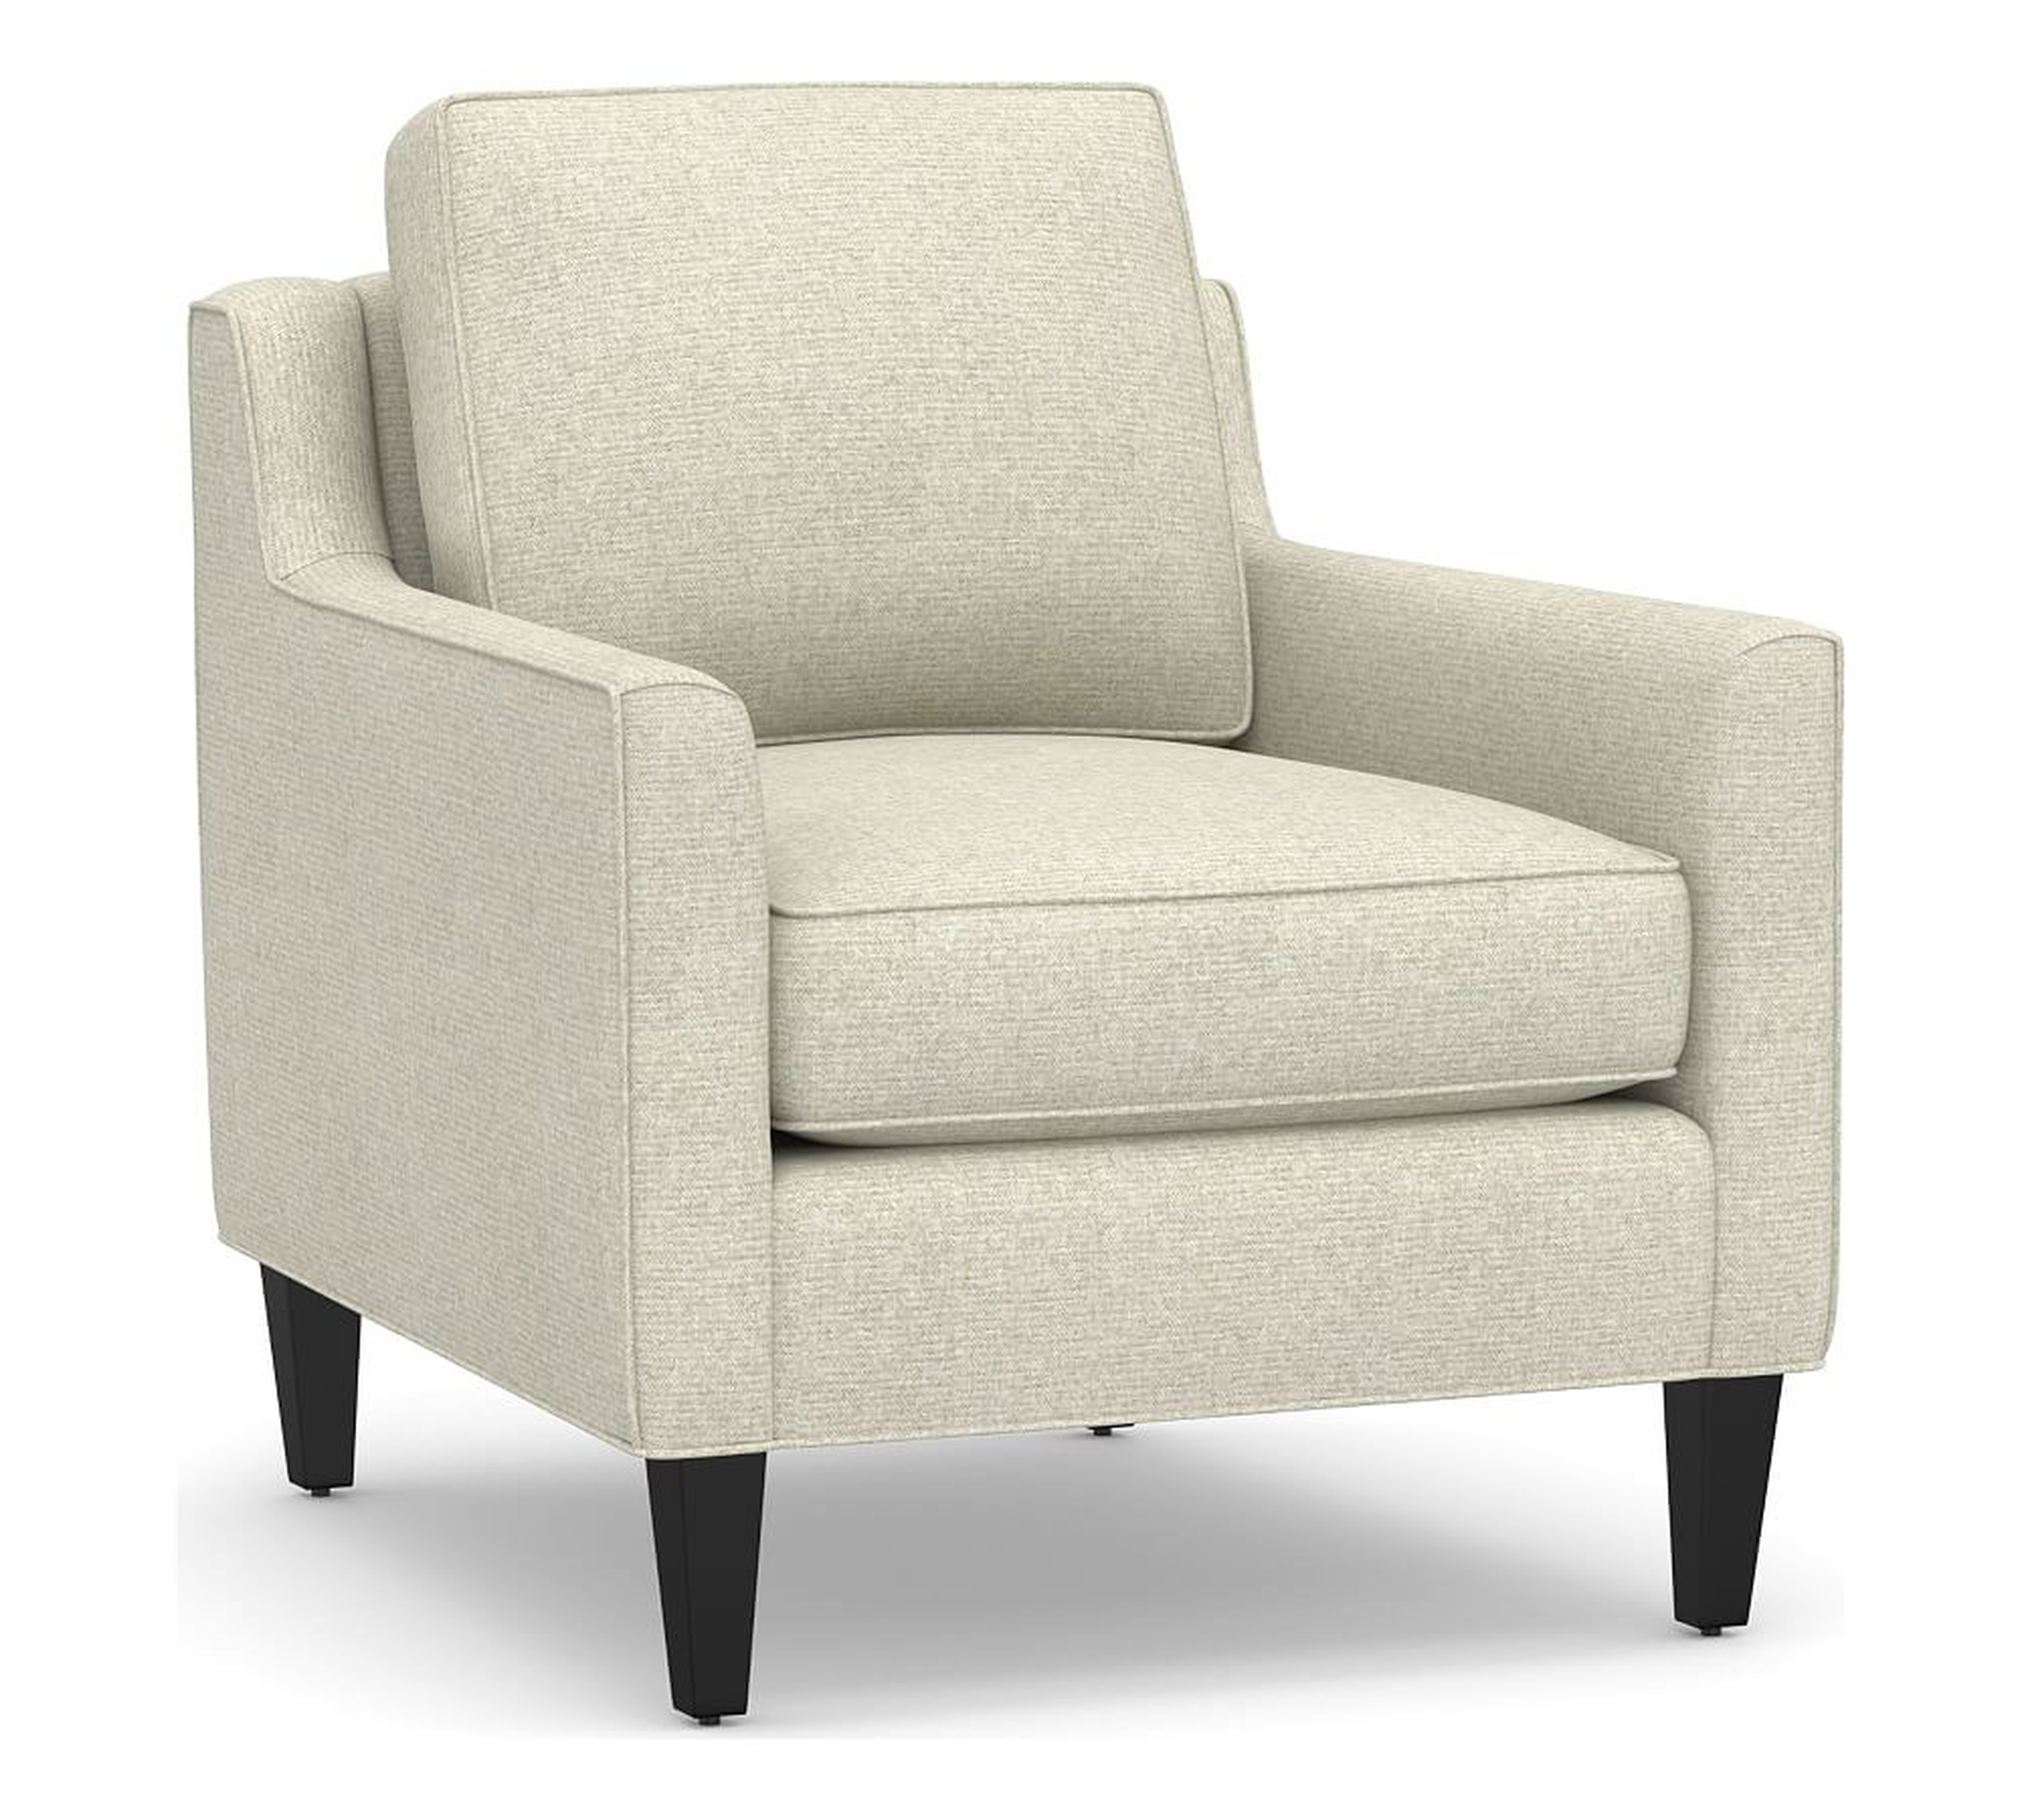 Beverly Upholstered Armchair, Polyester Wrapped Cushions, Performance Heathered Basketweave Alabaster White - Pottery Barn